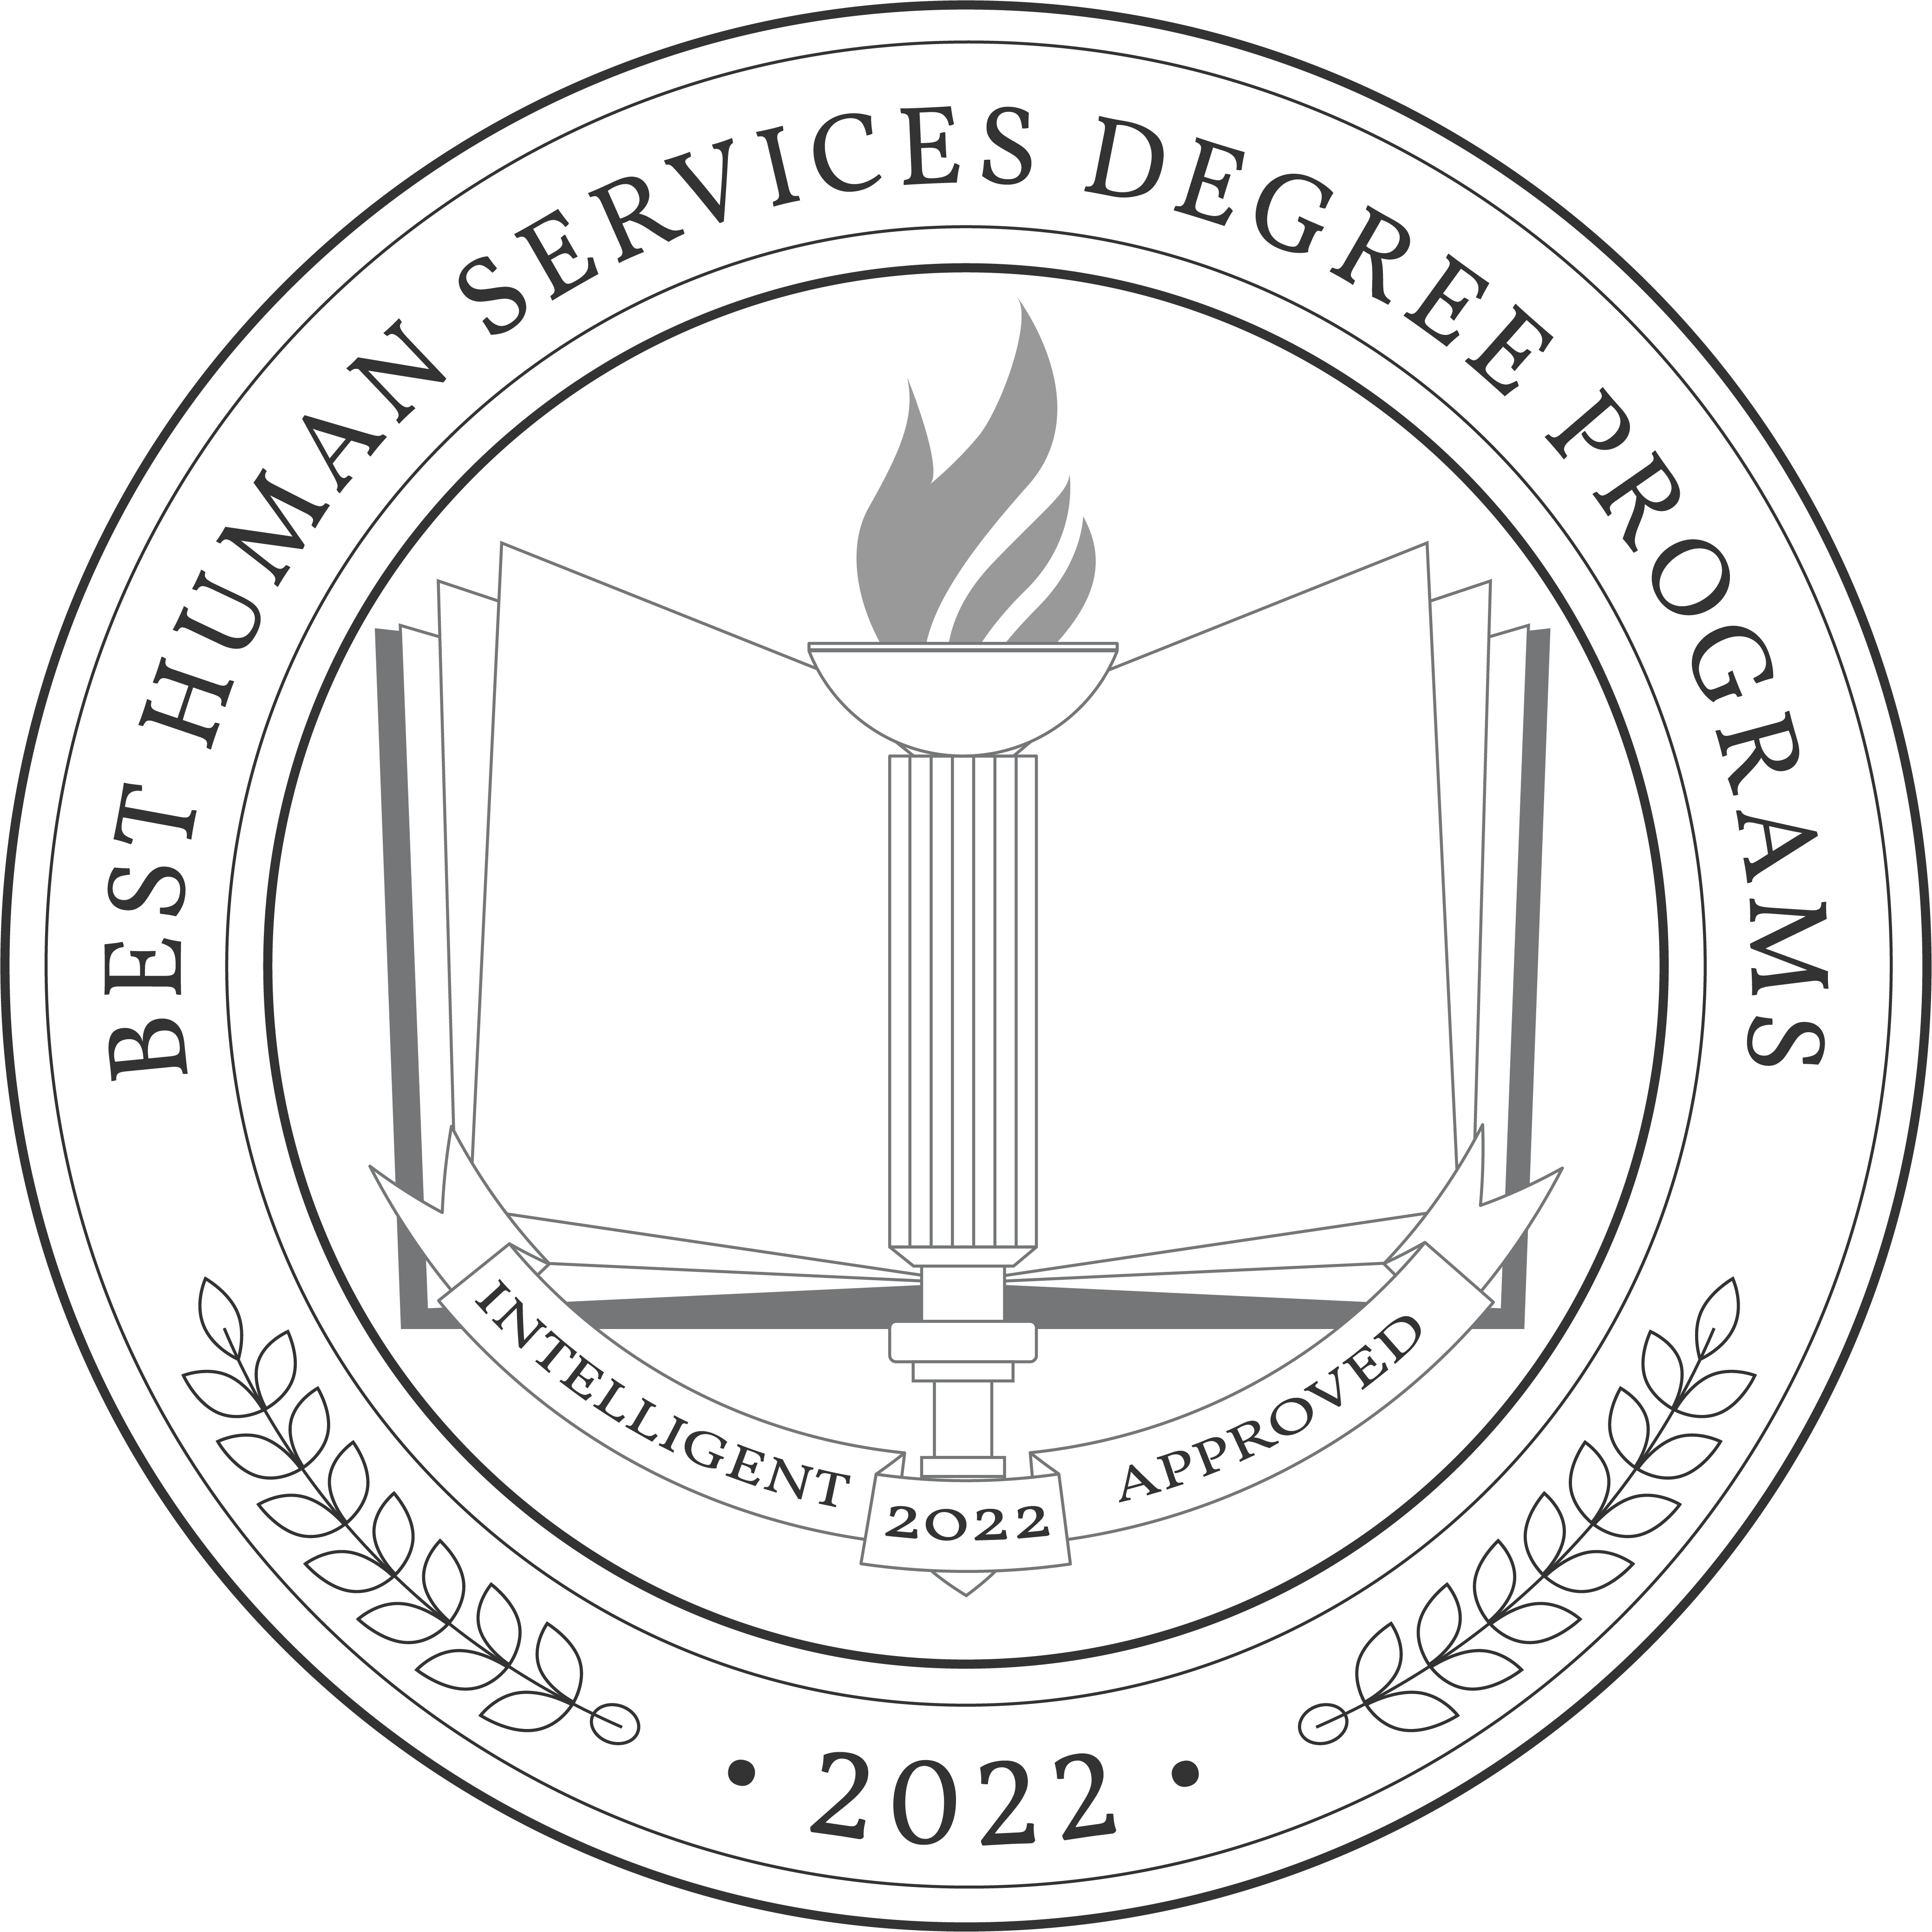 Best Human Services Degree Programs